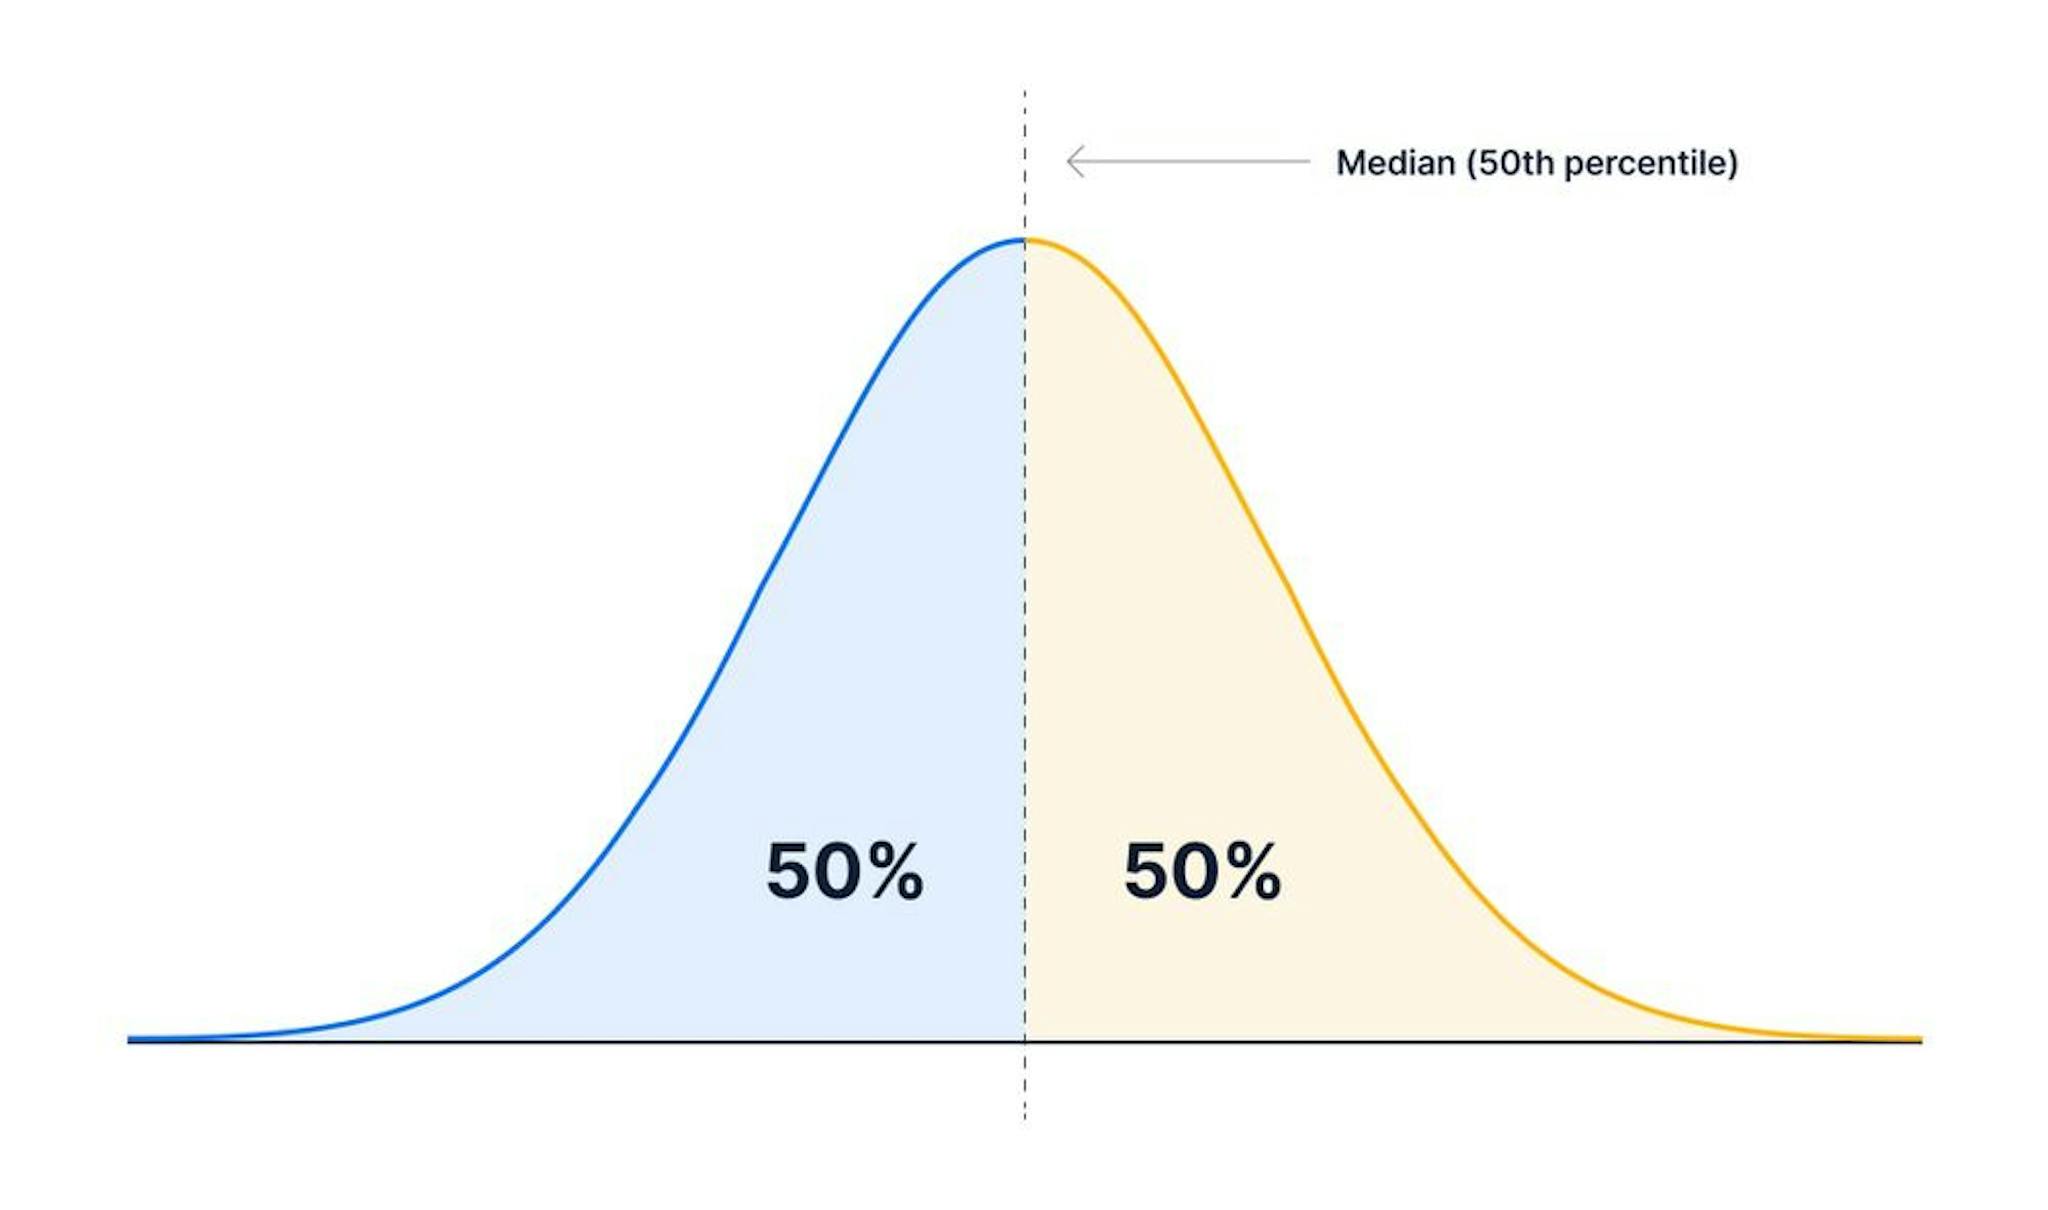 A normal distribution with the median/50th percentile depicted. 